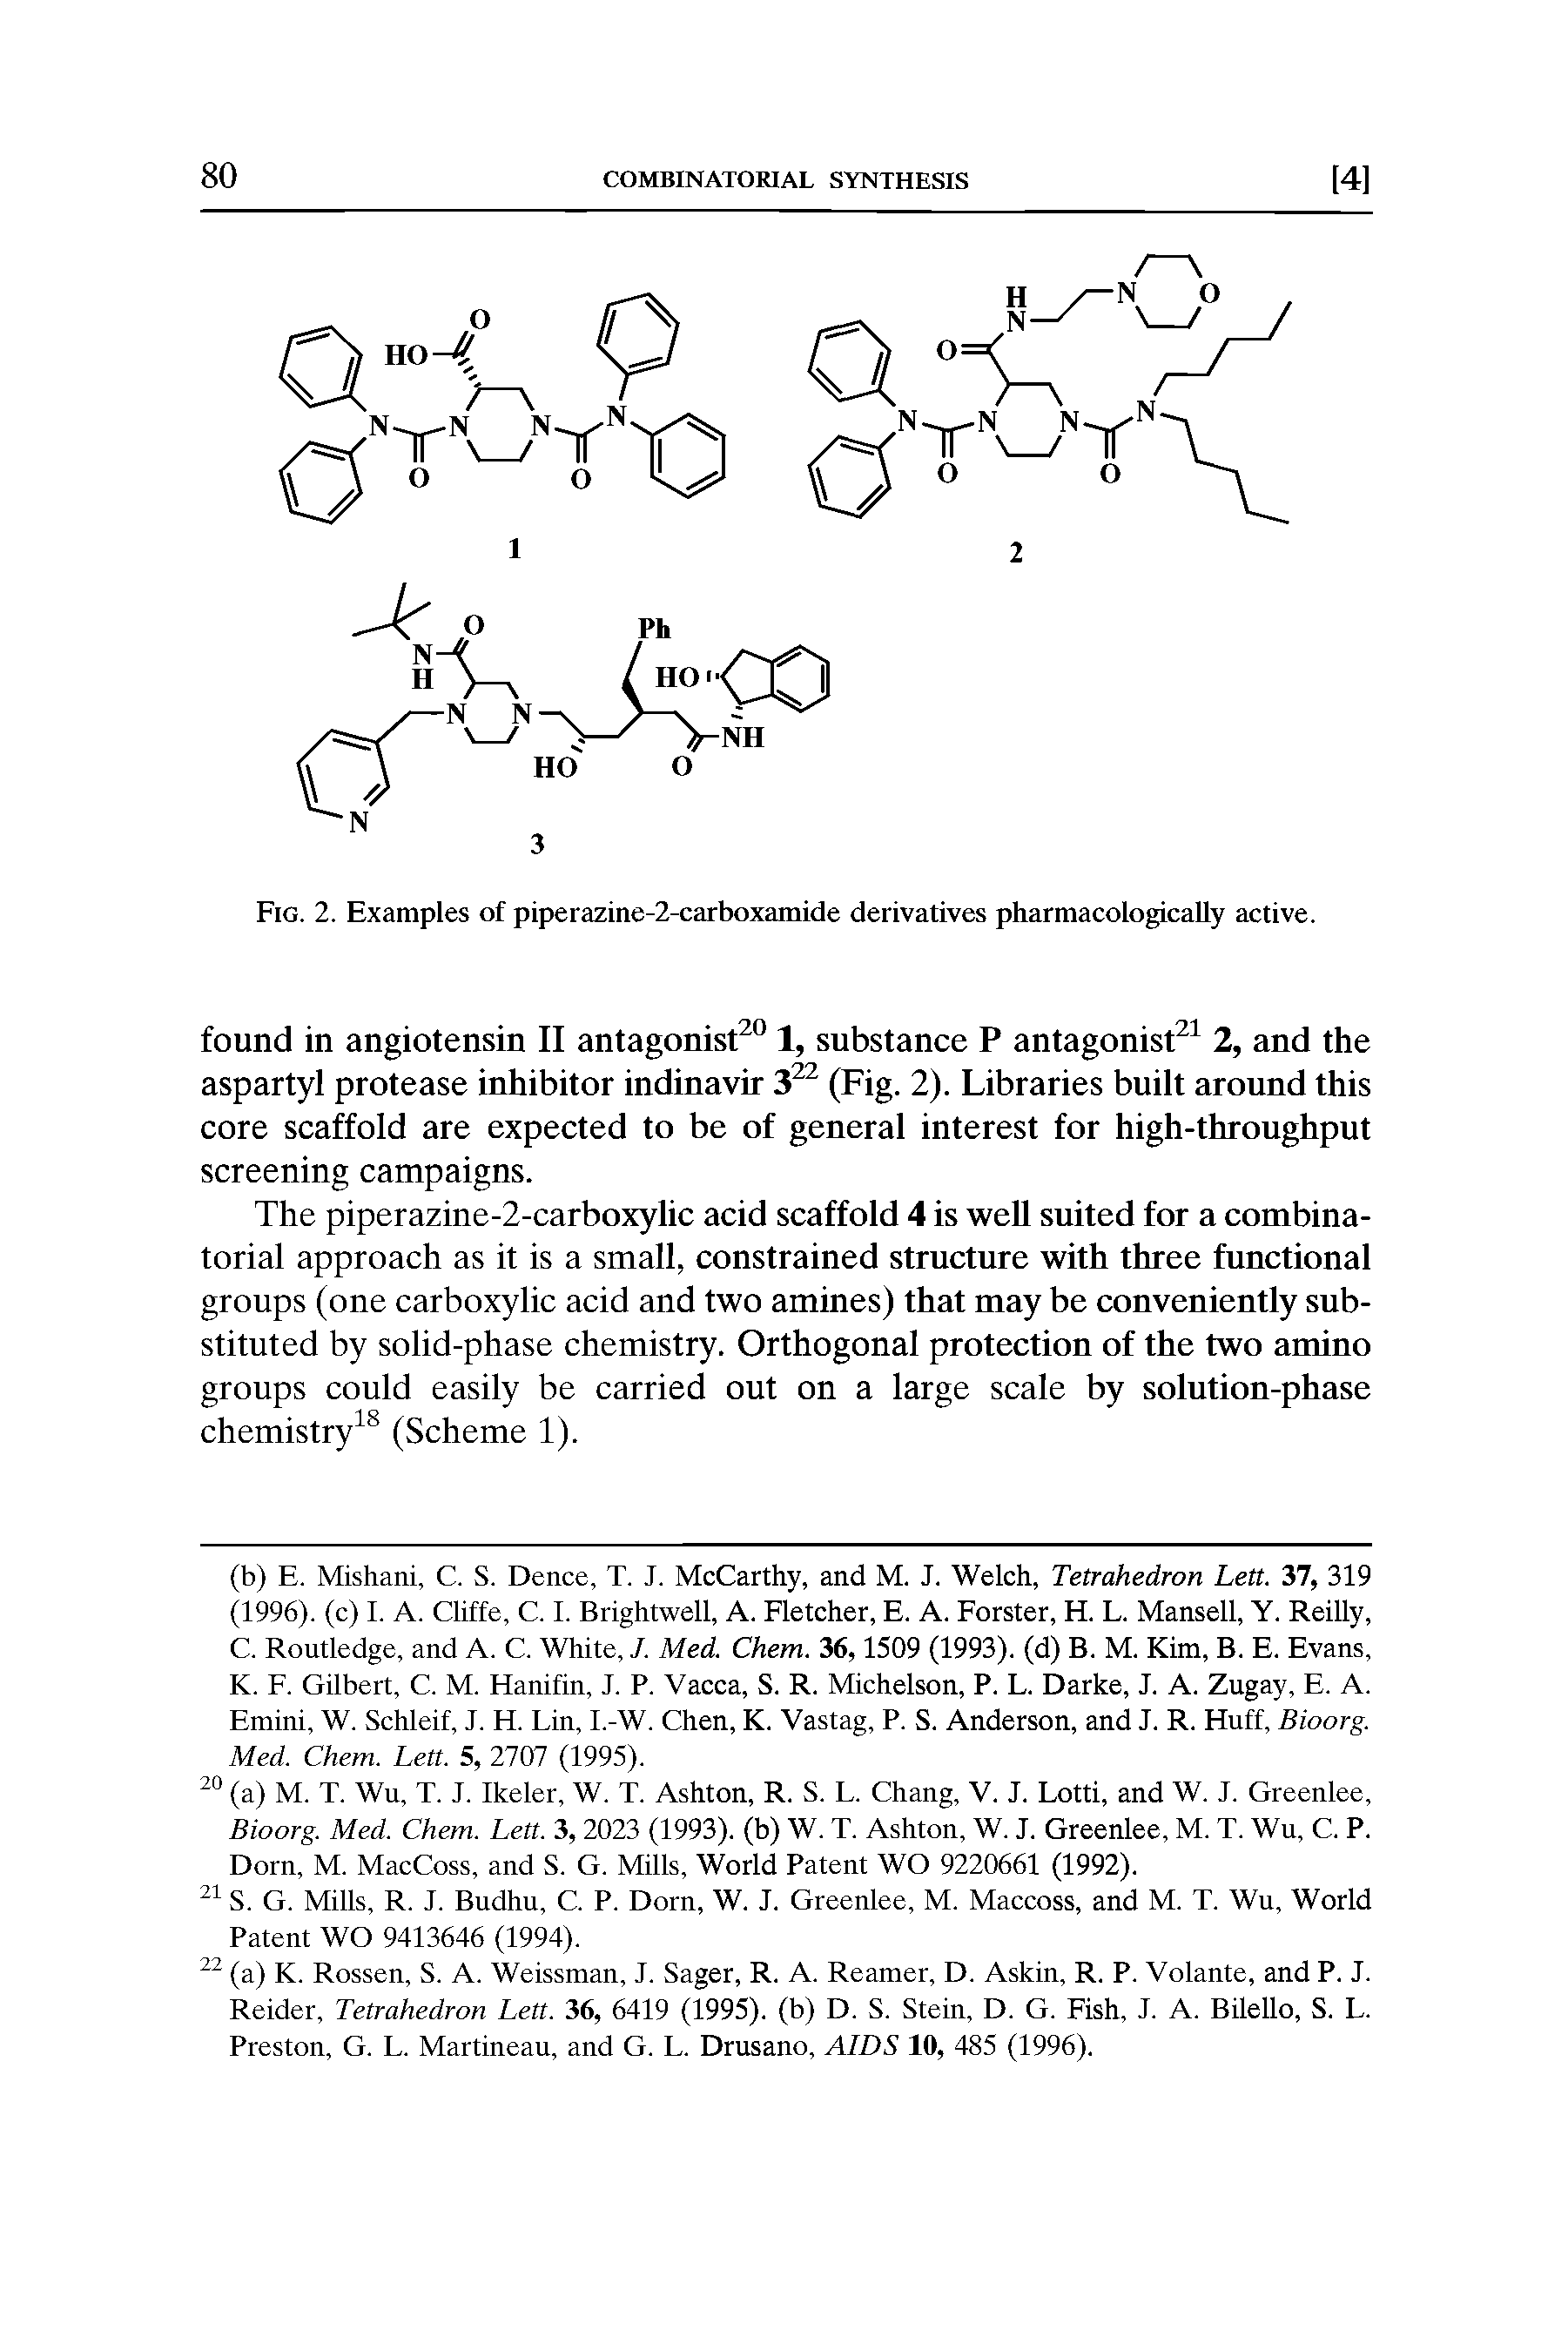 Fig. 2. Examples of piperazine-2-carboxamide derivatives pharmacologically active.